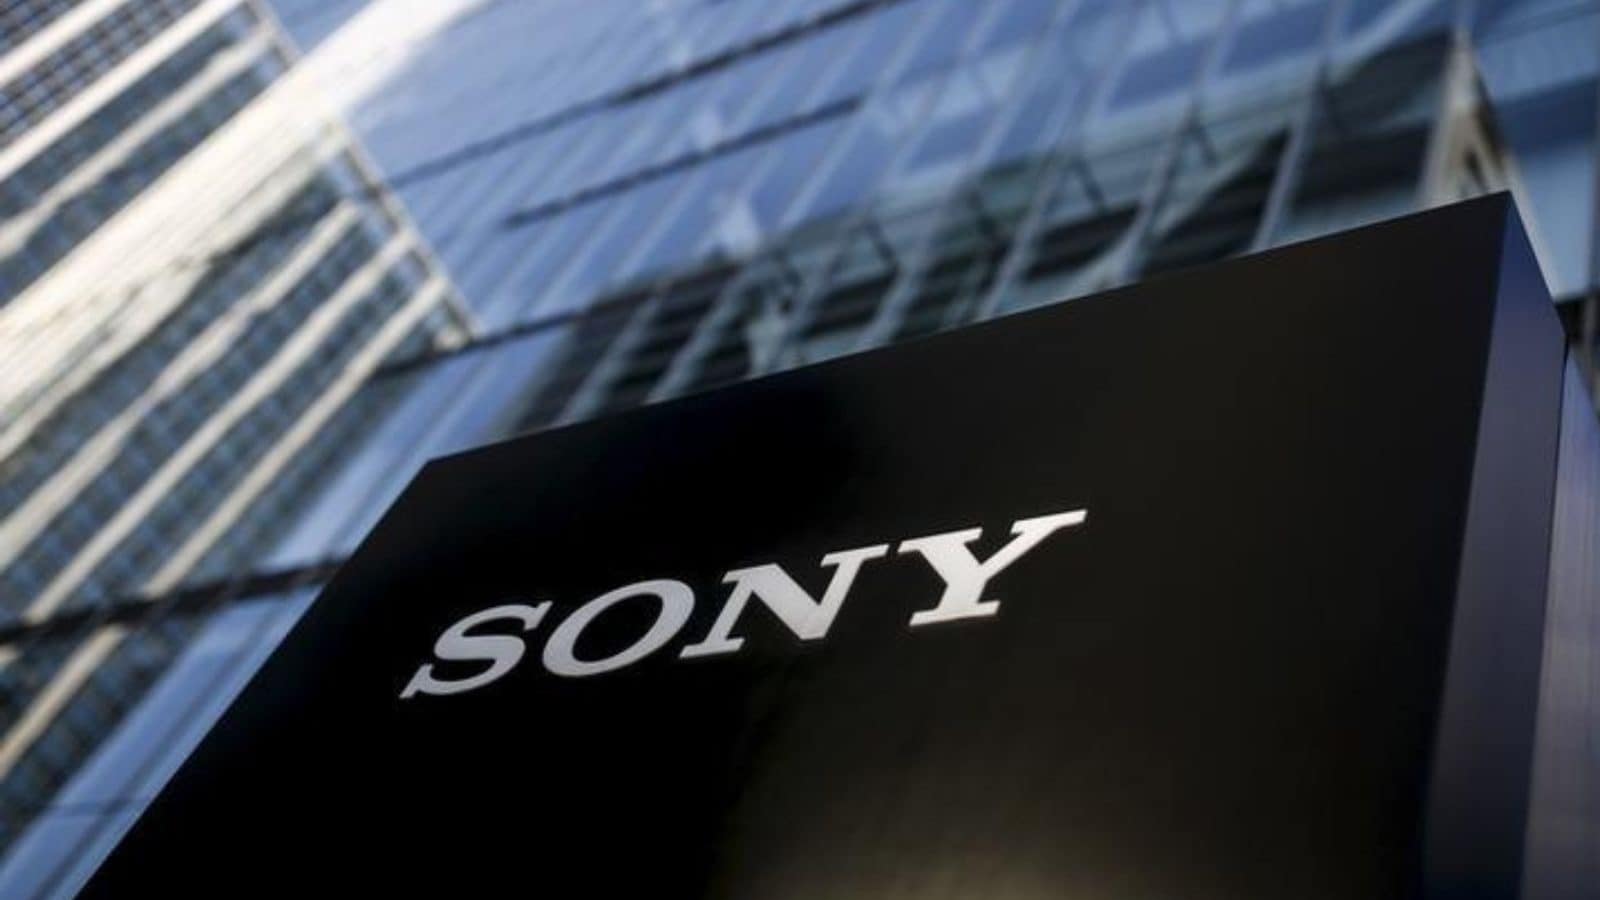 Sony Plans To Make Significant Investments To Develop Video Games In China